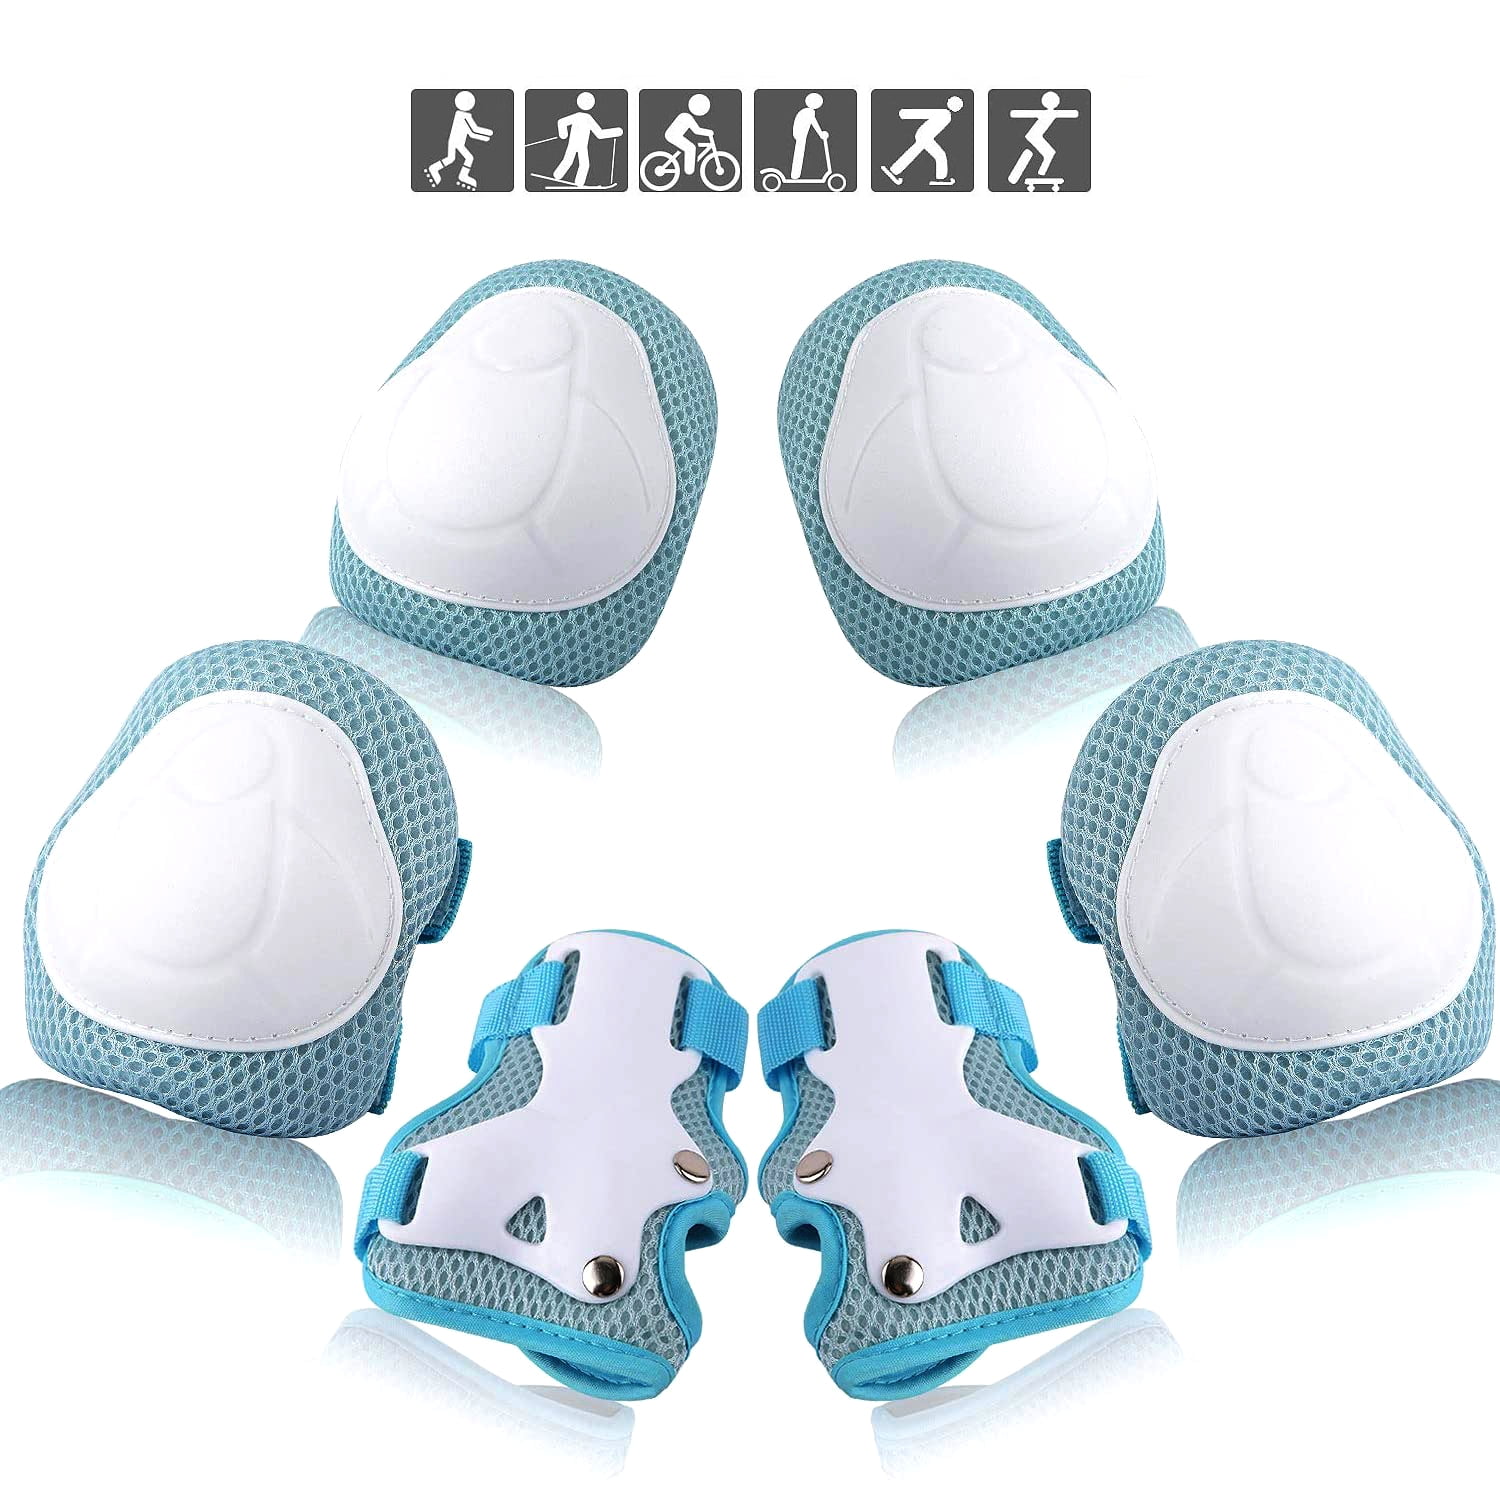 Blue PHZ Kids/Adults 3 in 1 Skateboard Protective Gear Set Knee Pads Elbow Pads Wrist Guards for Rollerblading Skateboard Cycling Skating Bike Scooter 